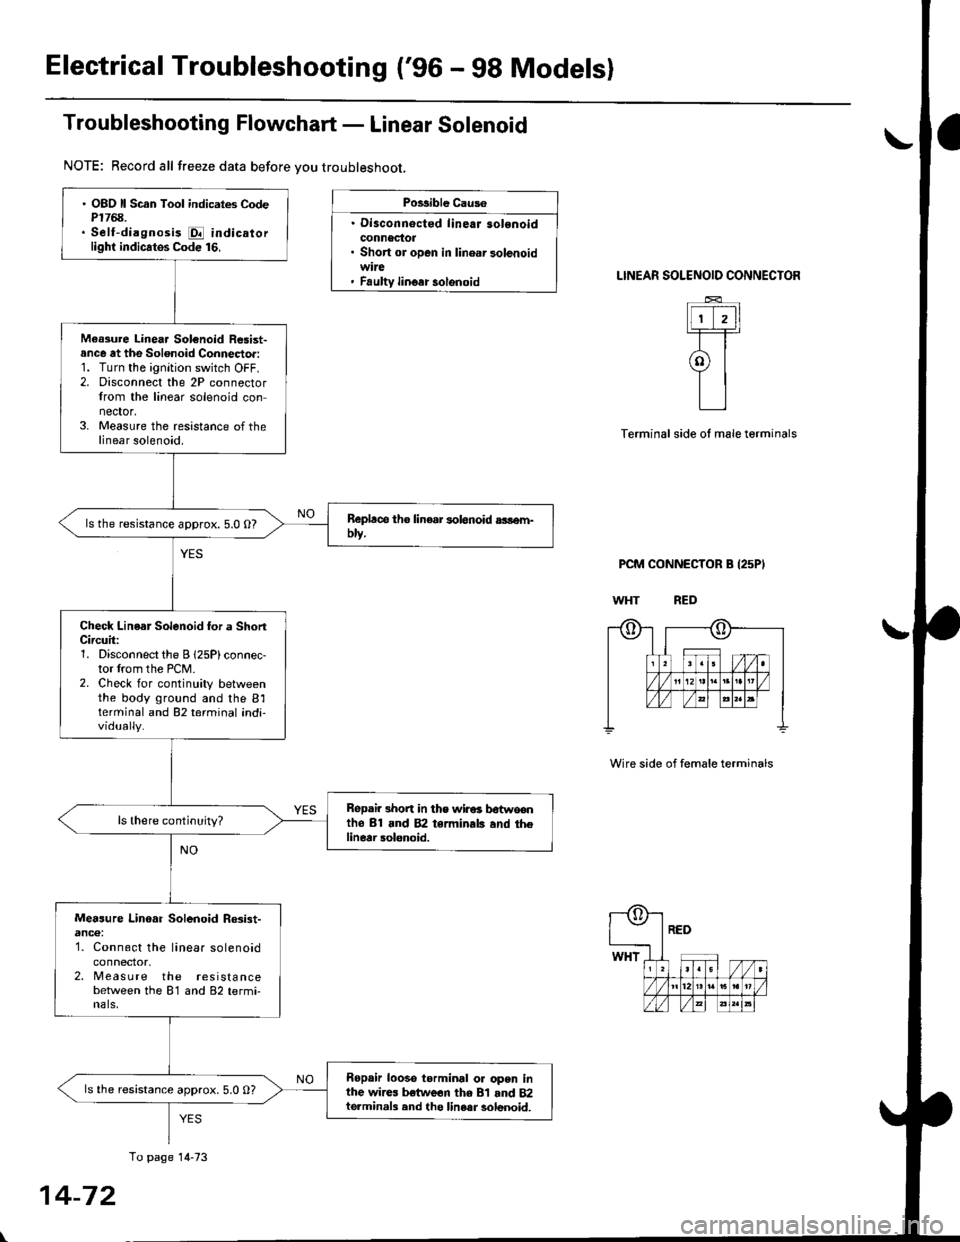 HONDA CIVIC 1997 6.G Repair Manual Electrical Troubleshooting (96 - 98 Modelsl
Troubleshooting Flowchart - Linear Solenoid
NOTE: Record all freeze data before vou troubleshoot,
Po$ible Caus6
. Disconnoctod lineaJ solonoidconnectot. Sh